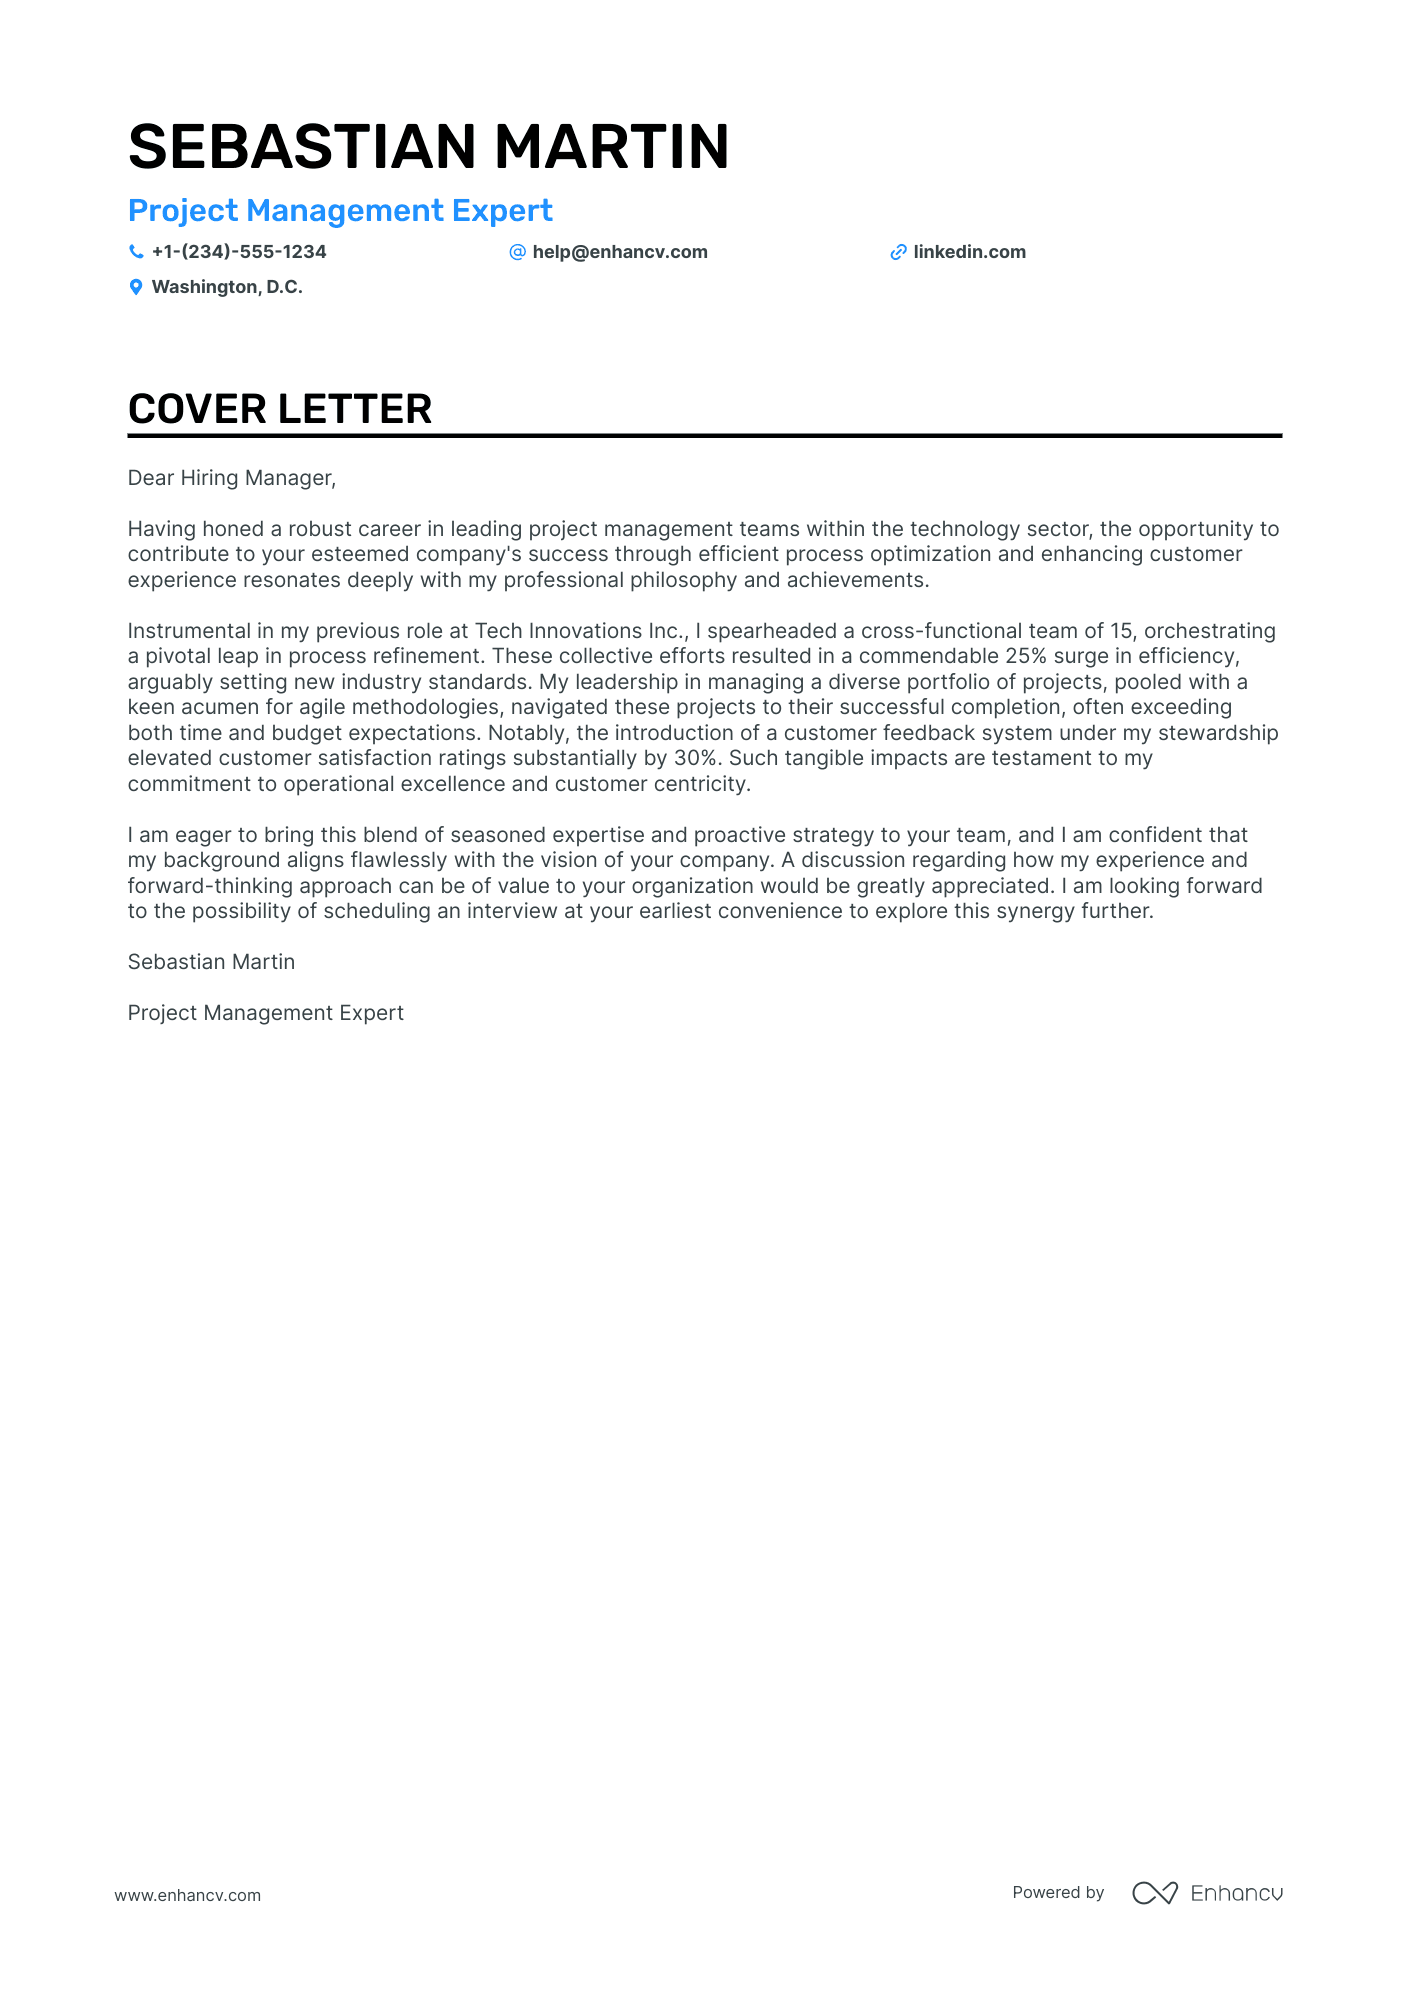 Planning Manager cover letter